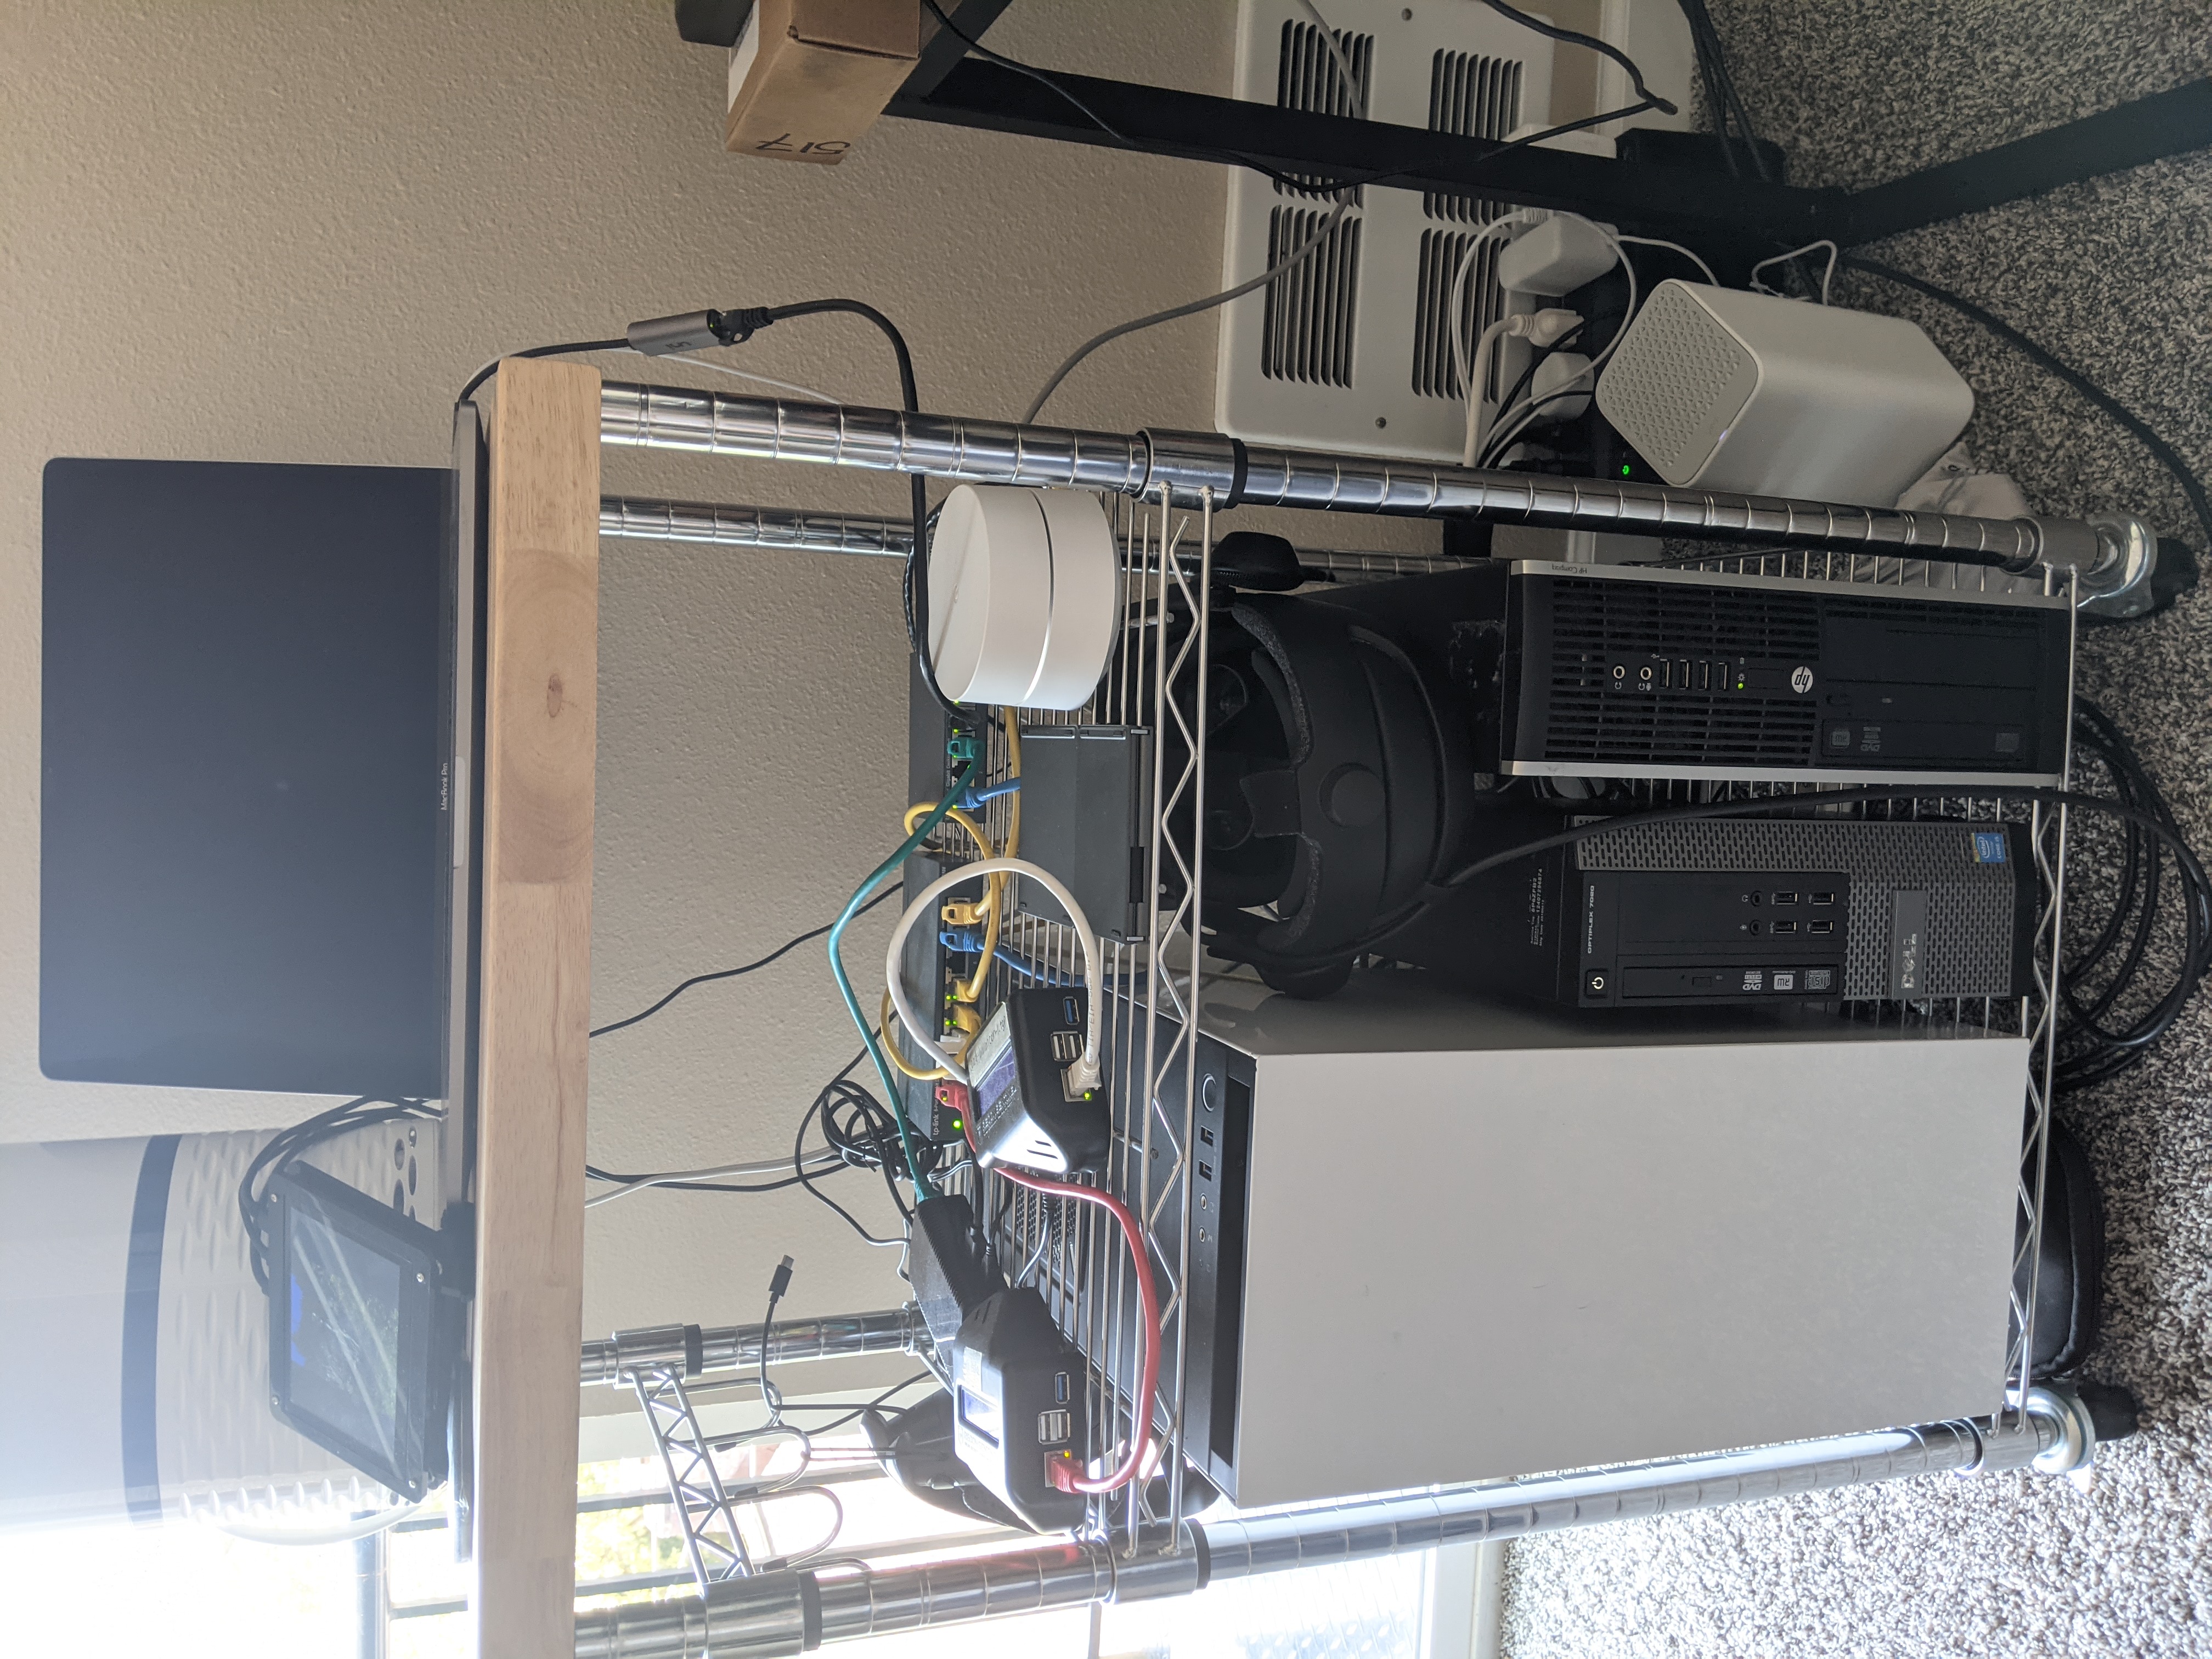 The Homelab in all its glory